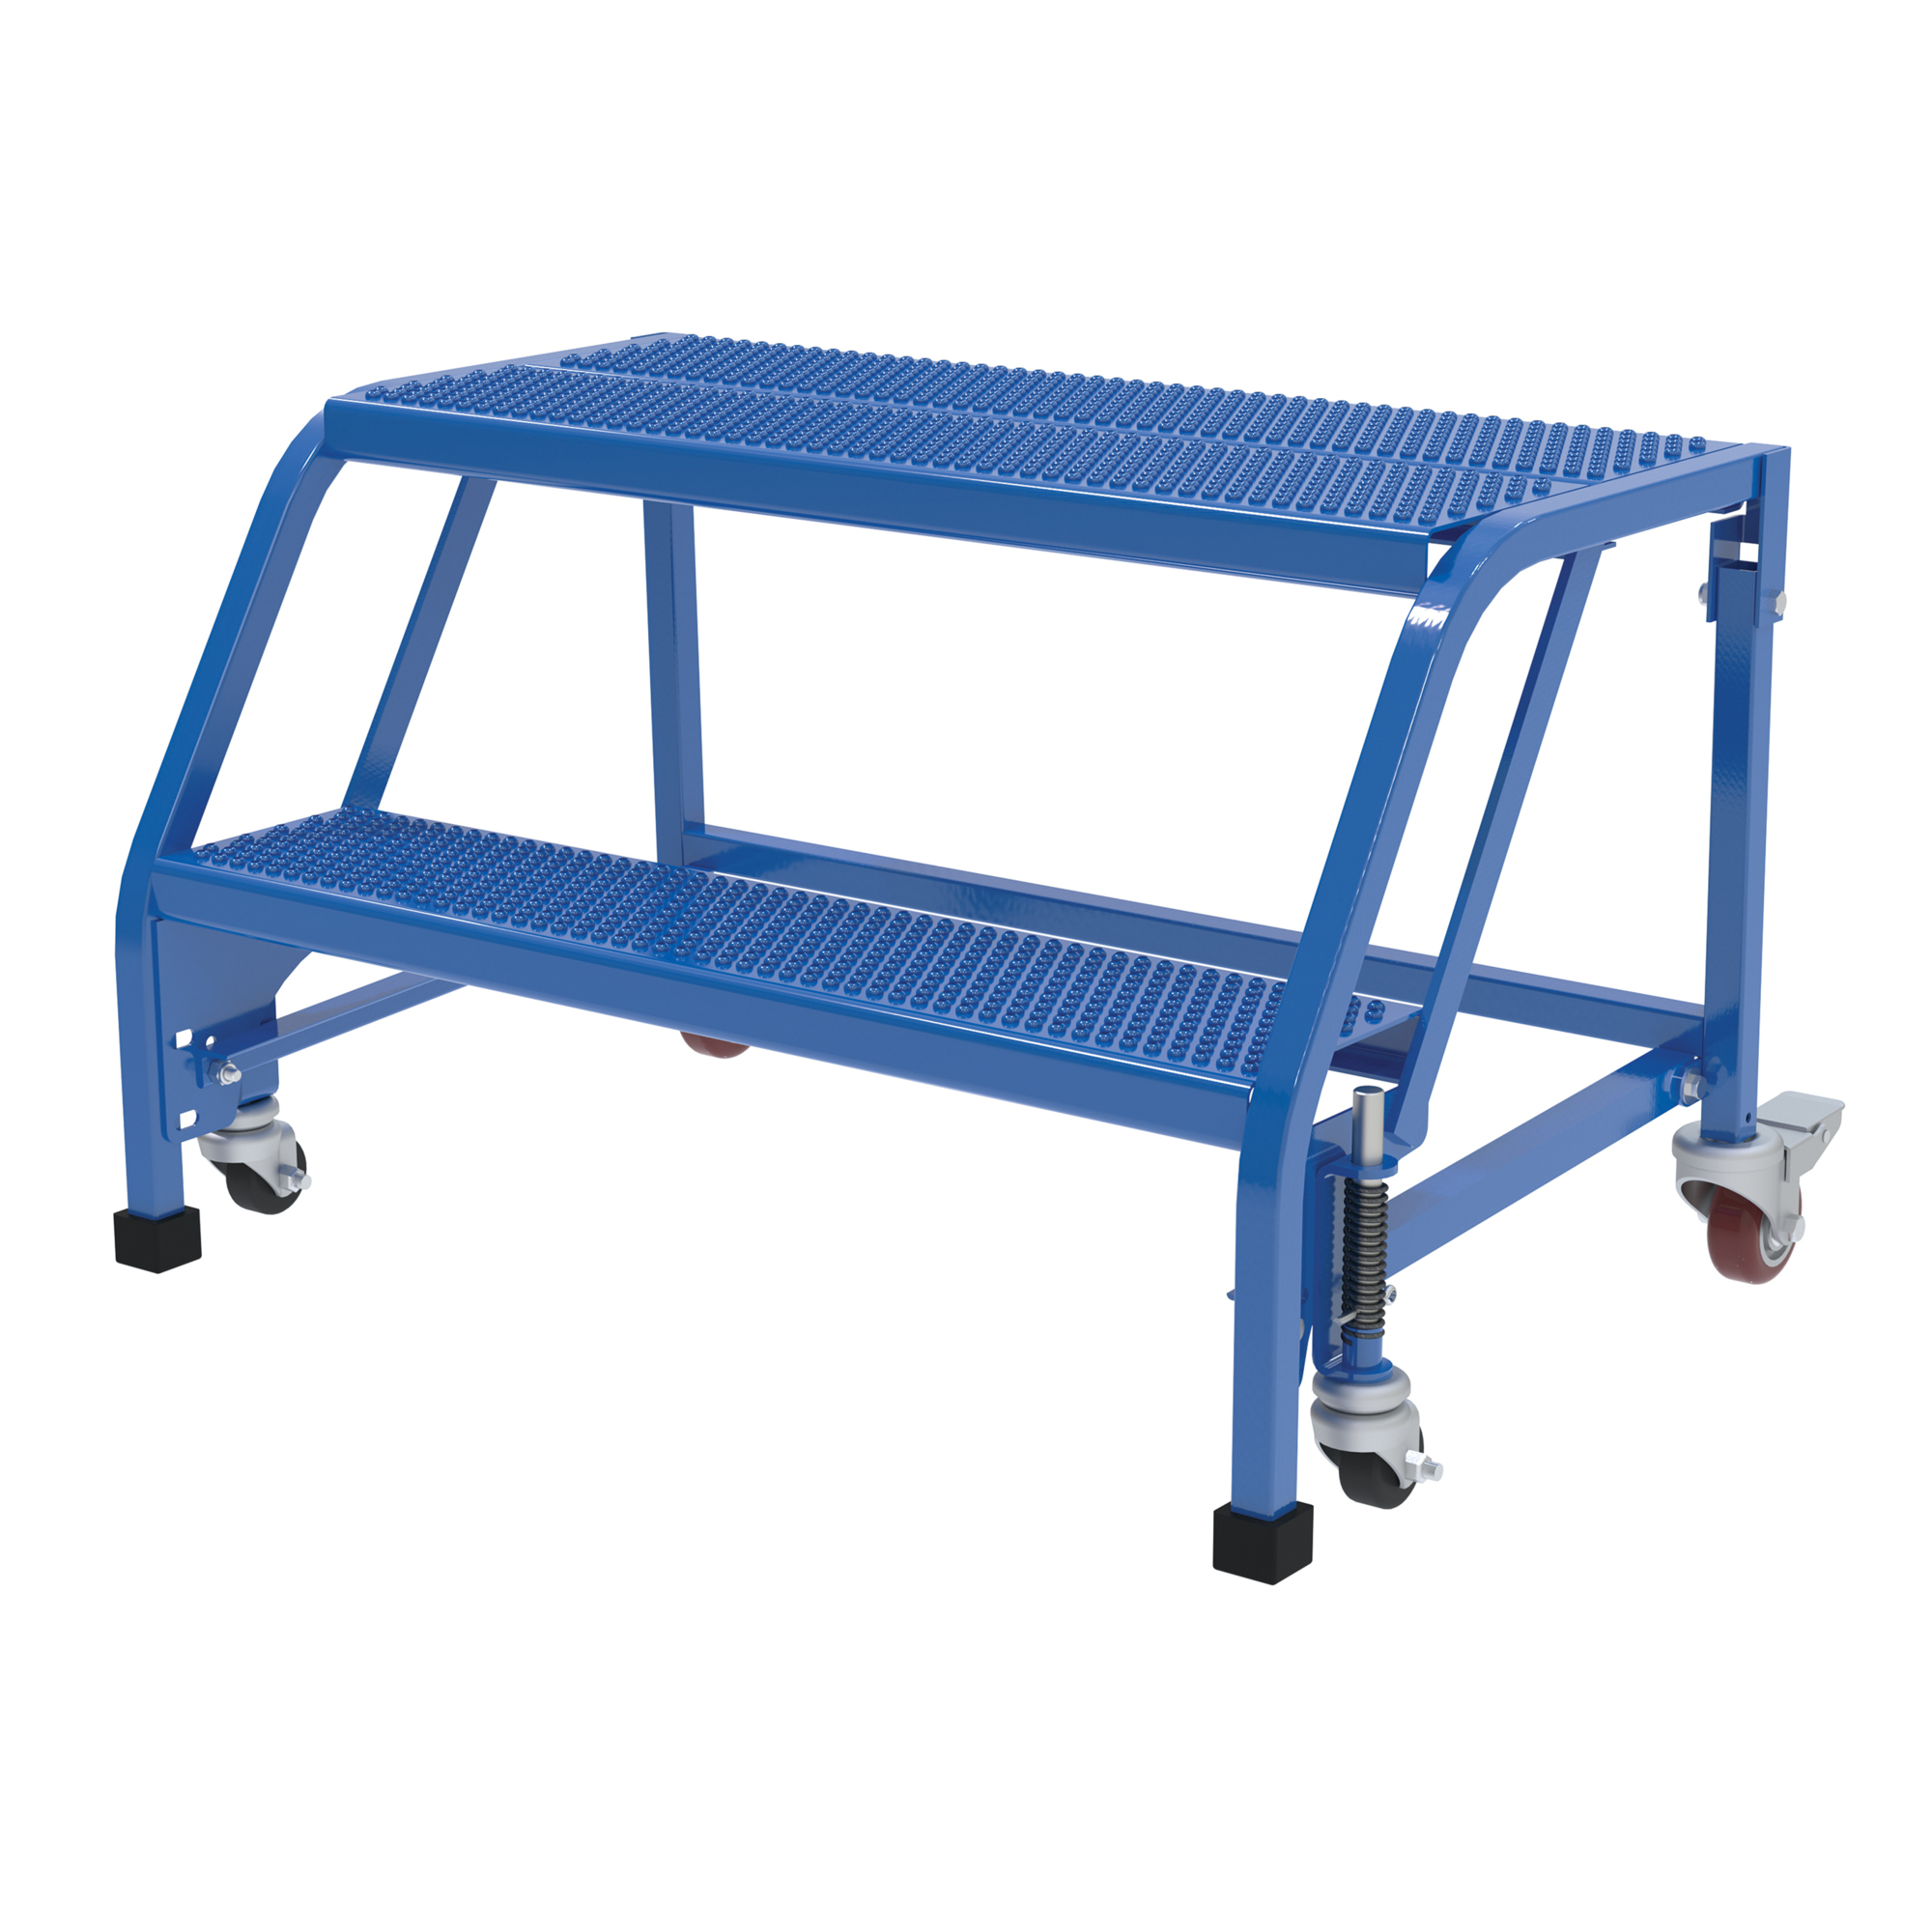 Vestil, 2 Step perforated warehouse ladder no rail, Overall Height 20 in, Steps 2 Material Steel, Model LAD-PW-32-2-P-NHR